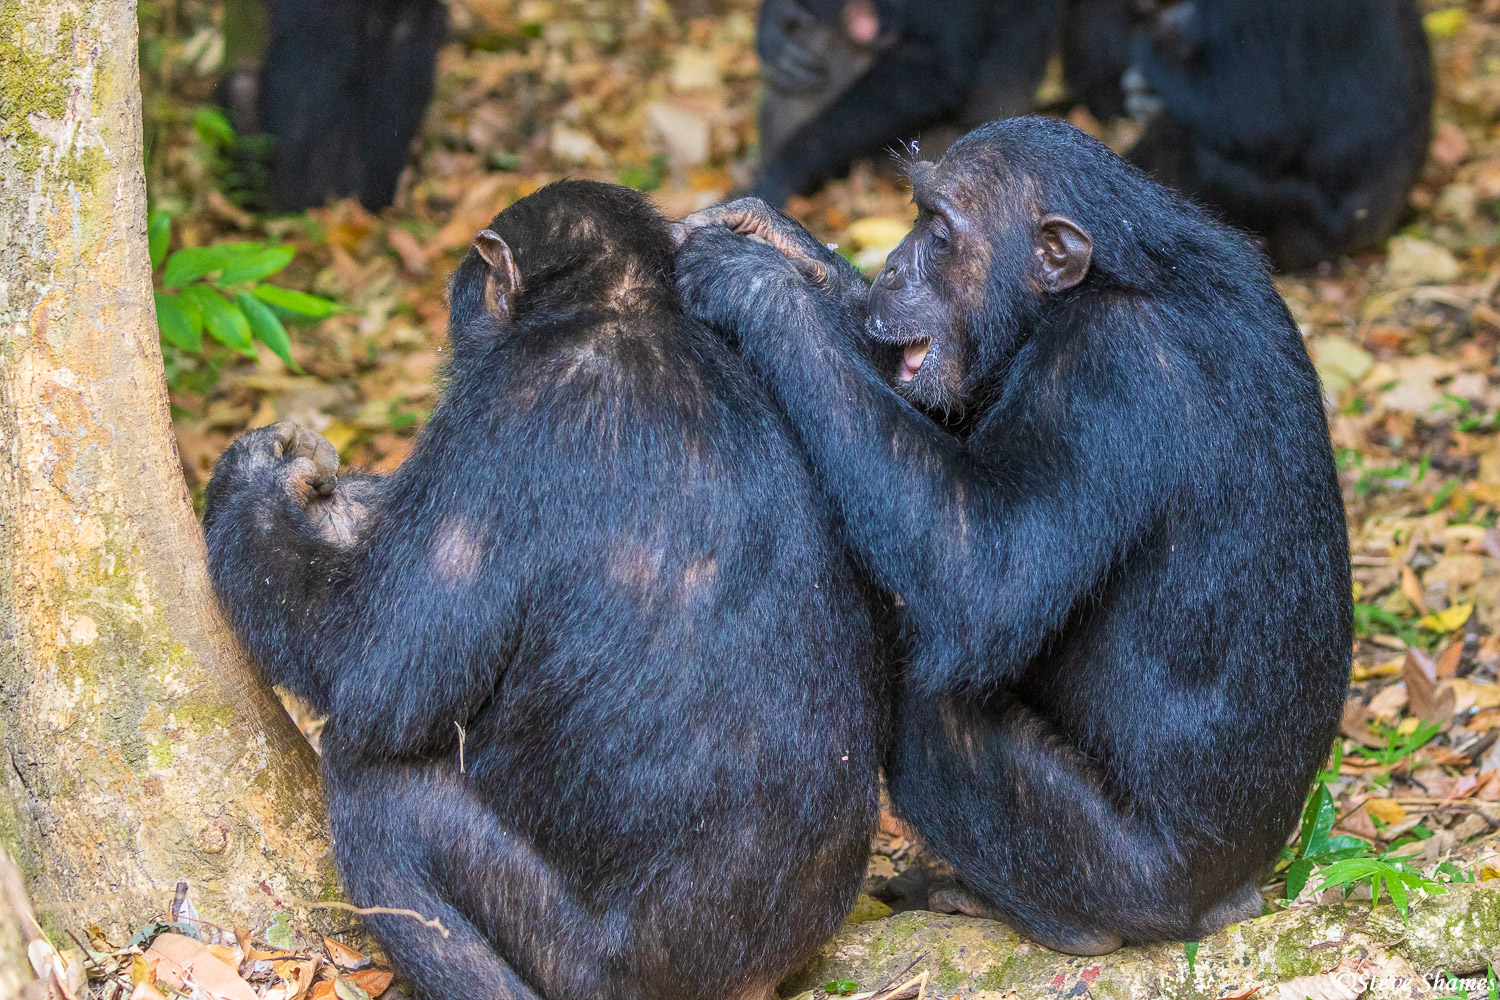 Grooming chimpanzees. They do that a lot.